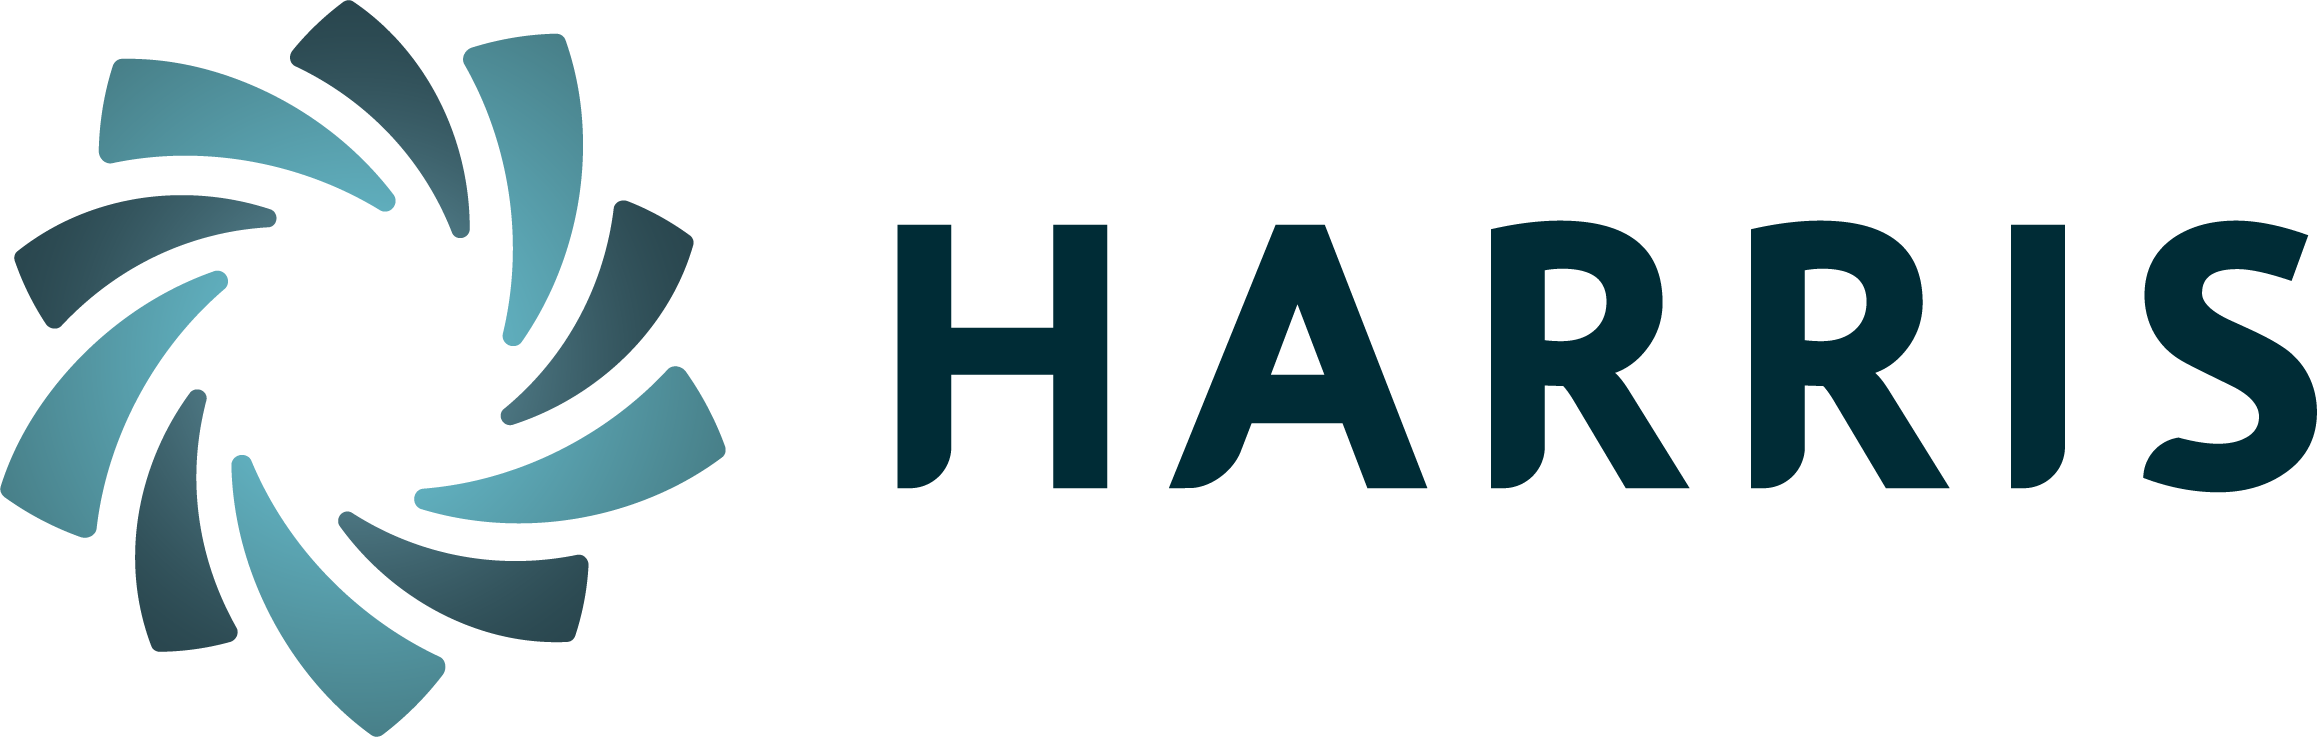 Harris Acquires MEDHOST, a Provider of Clinical and